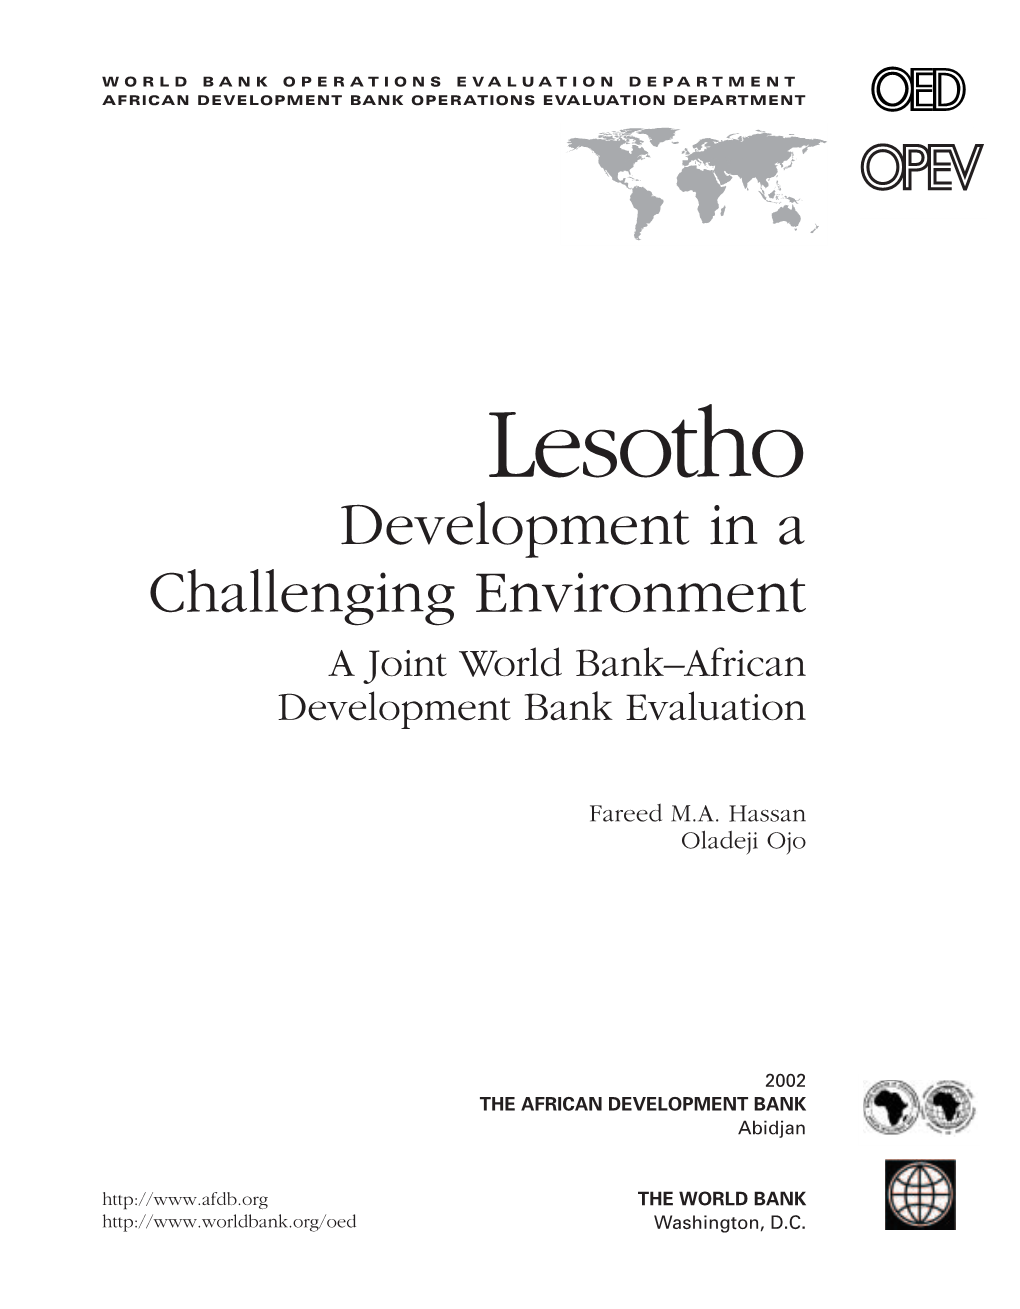 Lesotho Development in a Challenging Environment